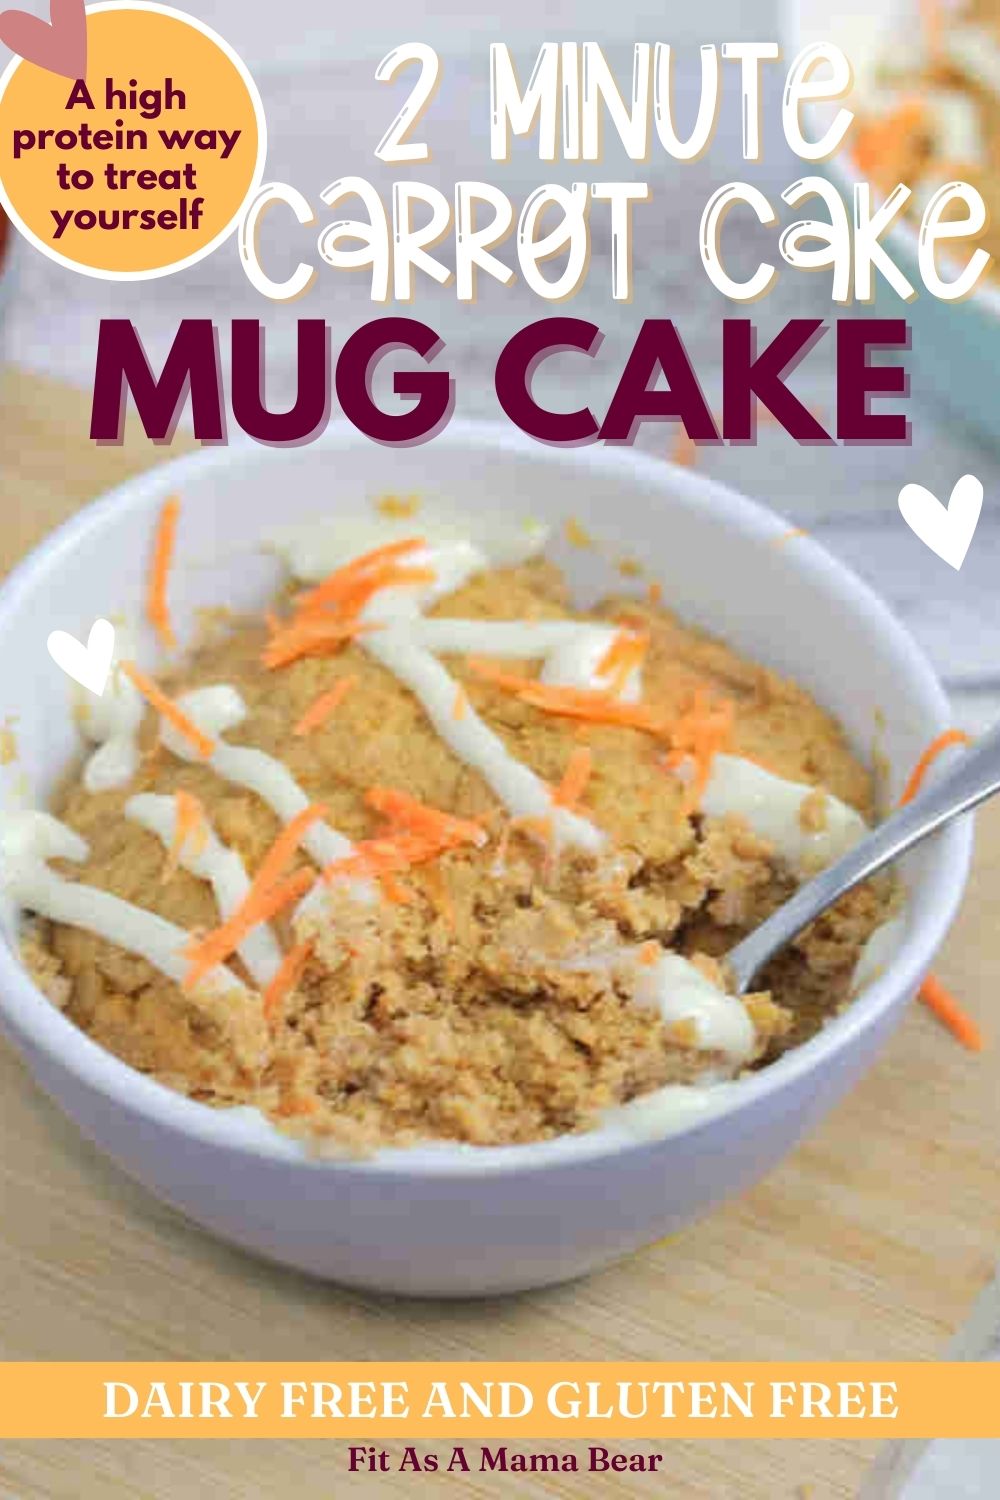 Carrot mug cake in a white ramekin with a spoon in the ramekin and cream cheese frosting on top. Ramekin on a cutting board with carrot behind it and text on the image.